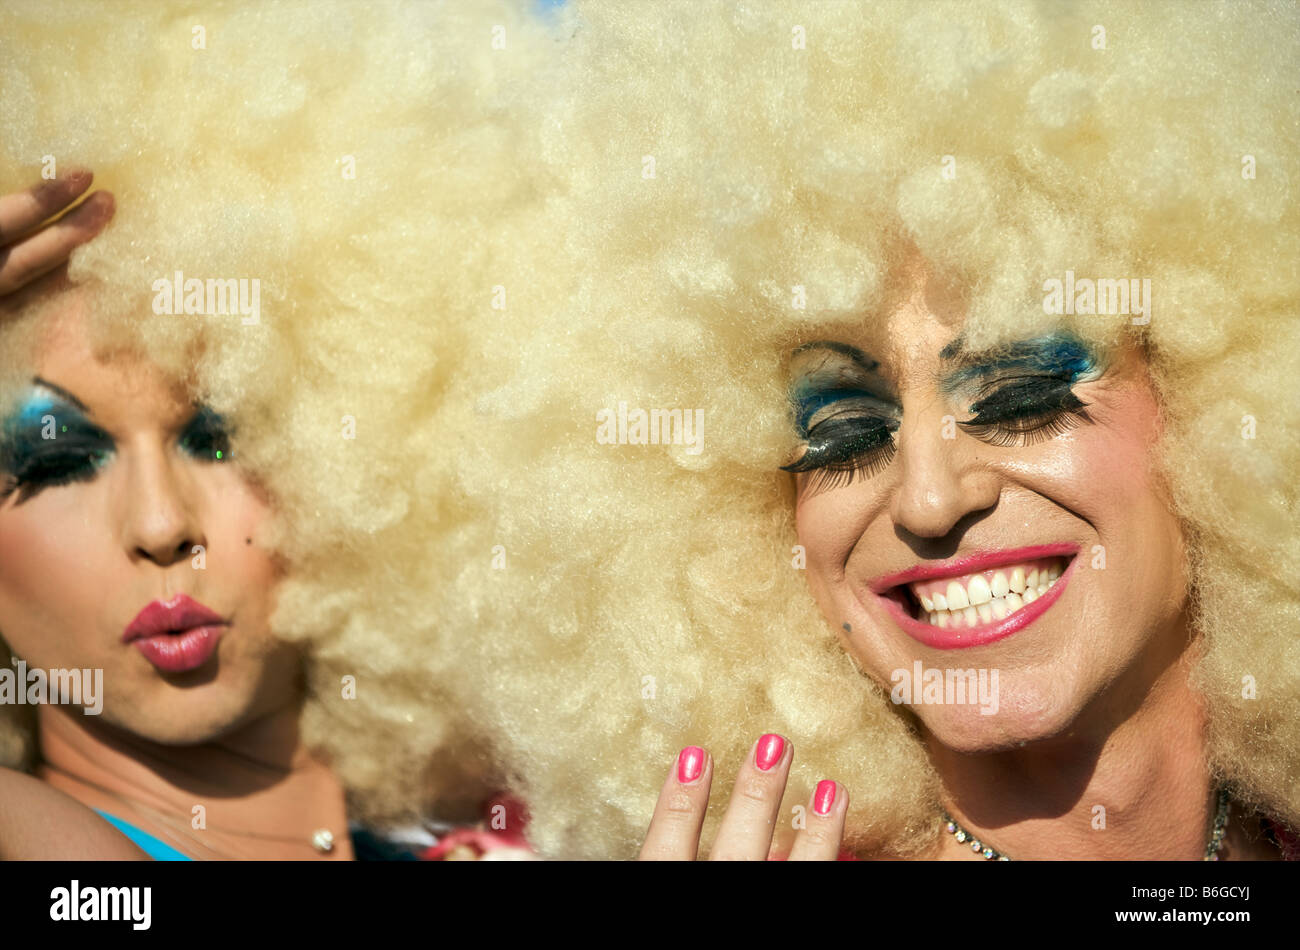 Christopher Street Day Berlin Man (Two men) Dressed as Woman (women) with Blond Wig and Heavy Makeup Stock Photo